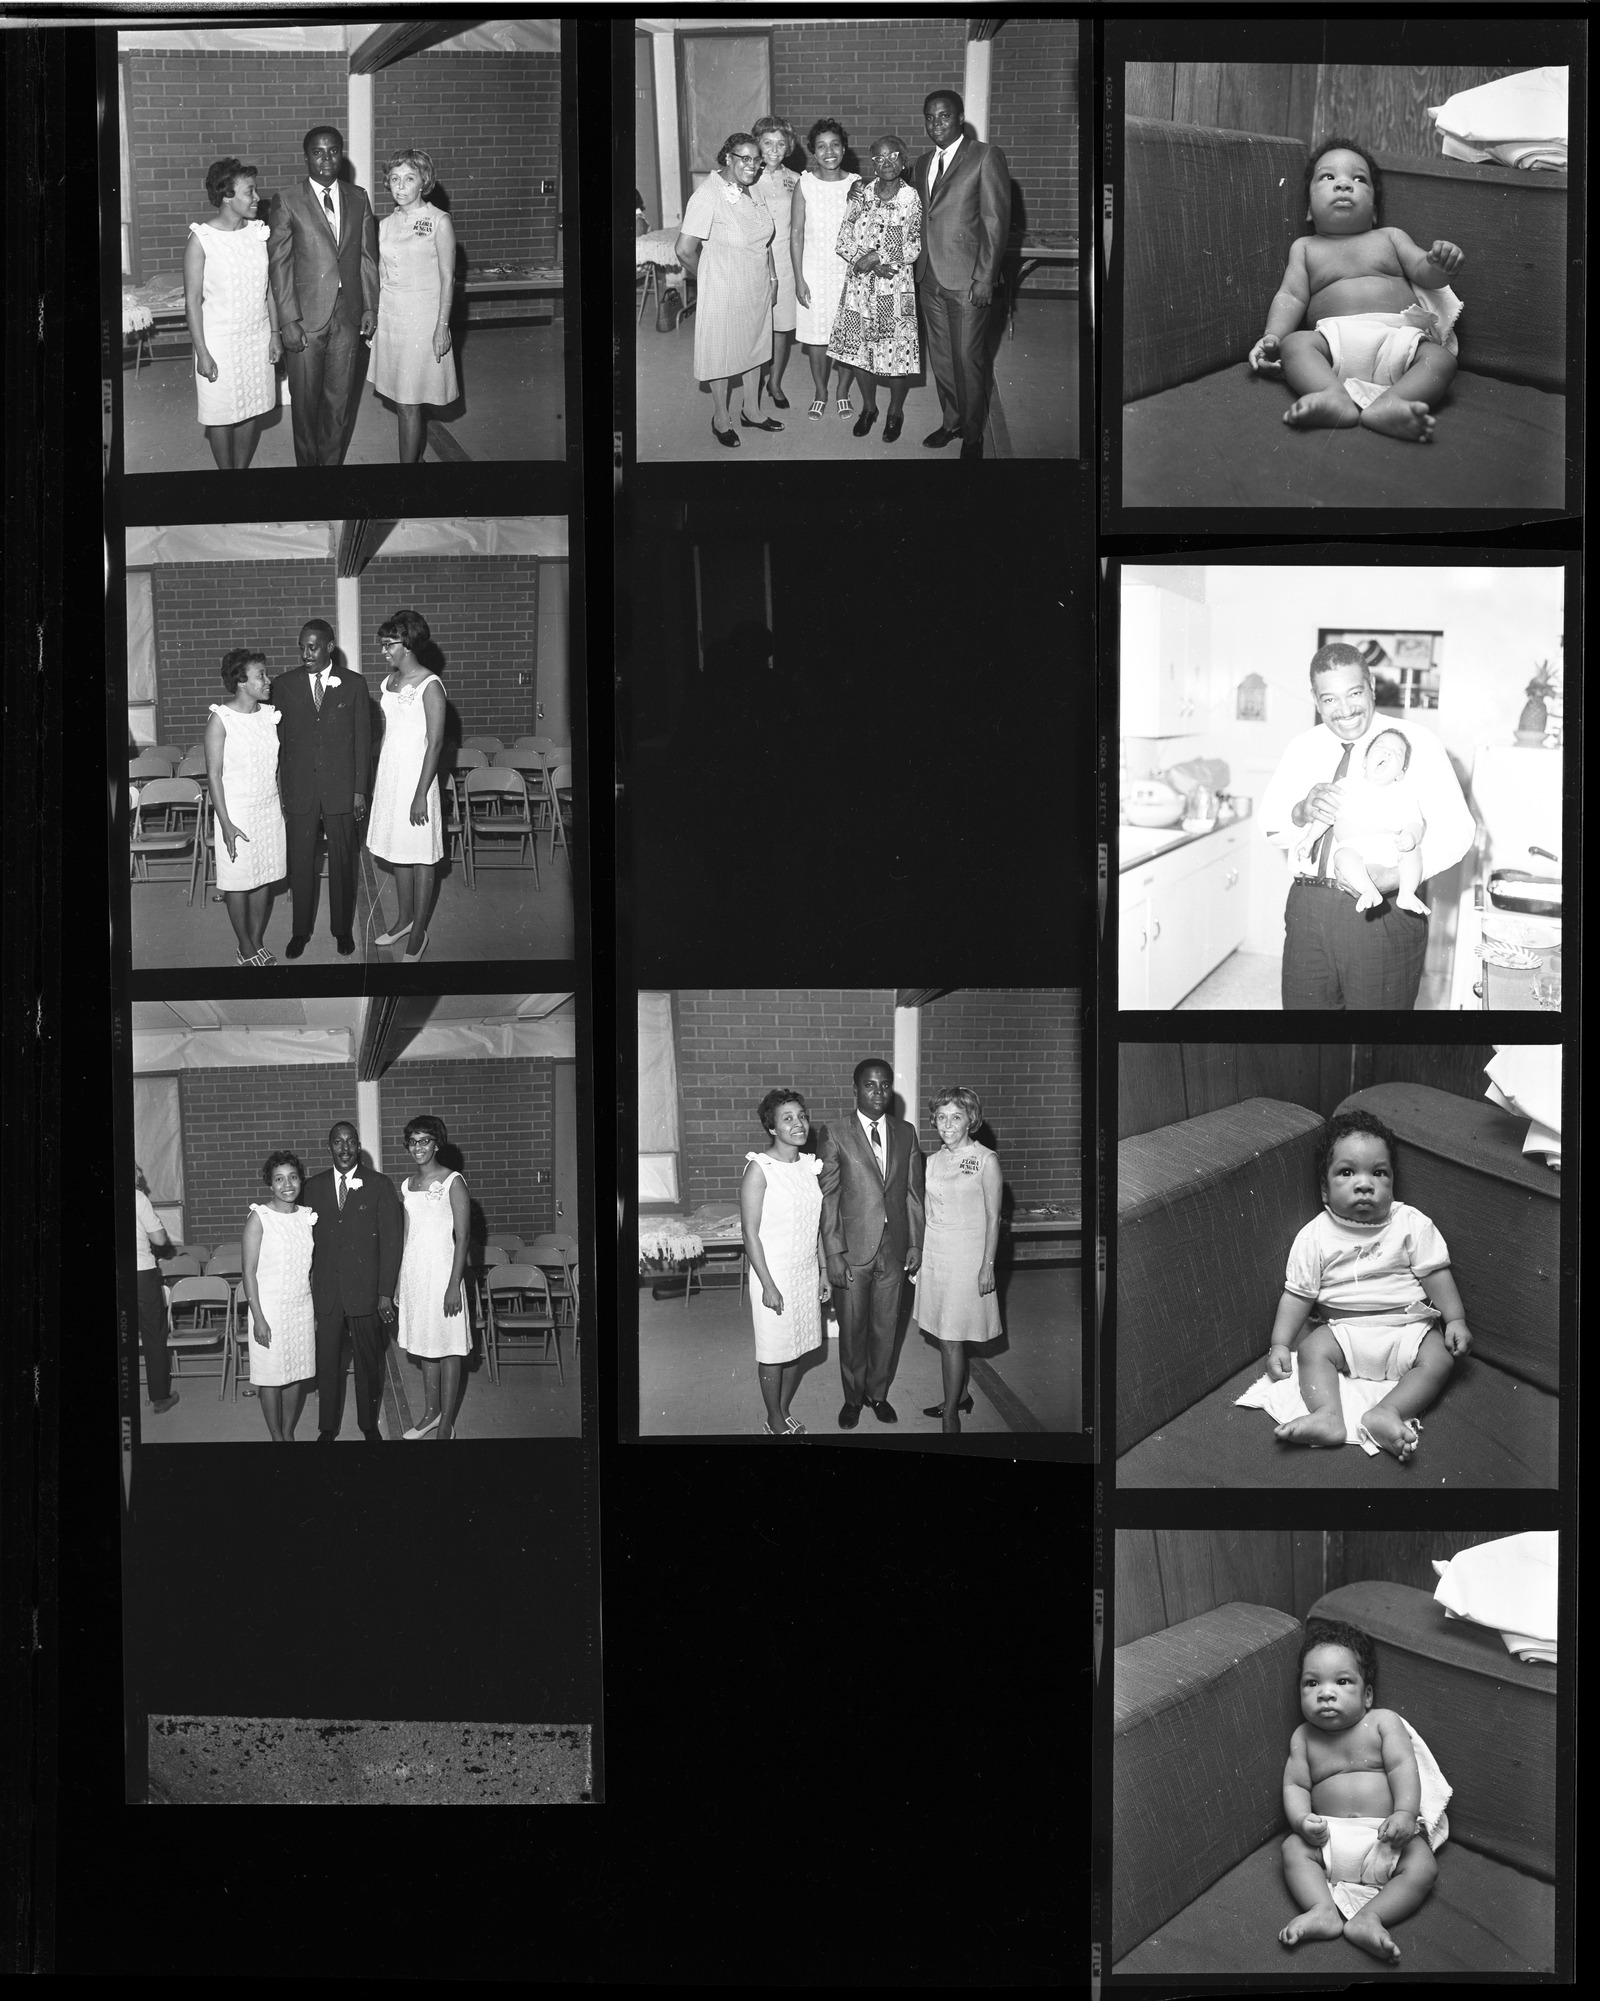 Set of negatives by Clinton Wright including A.T. McCoy's baby, barbeque for Helen Anderson campaign, and Variety Club party at Doolittle, 1968